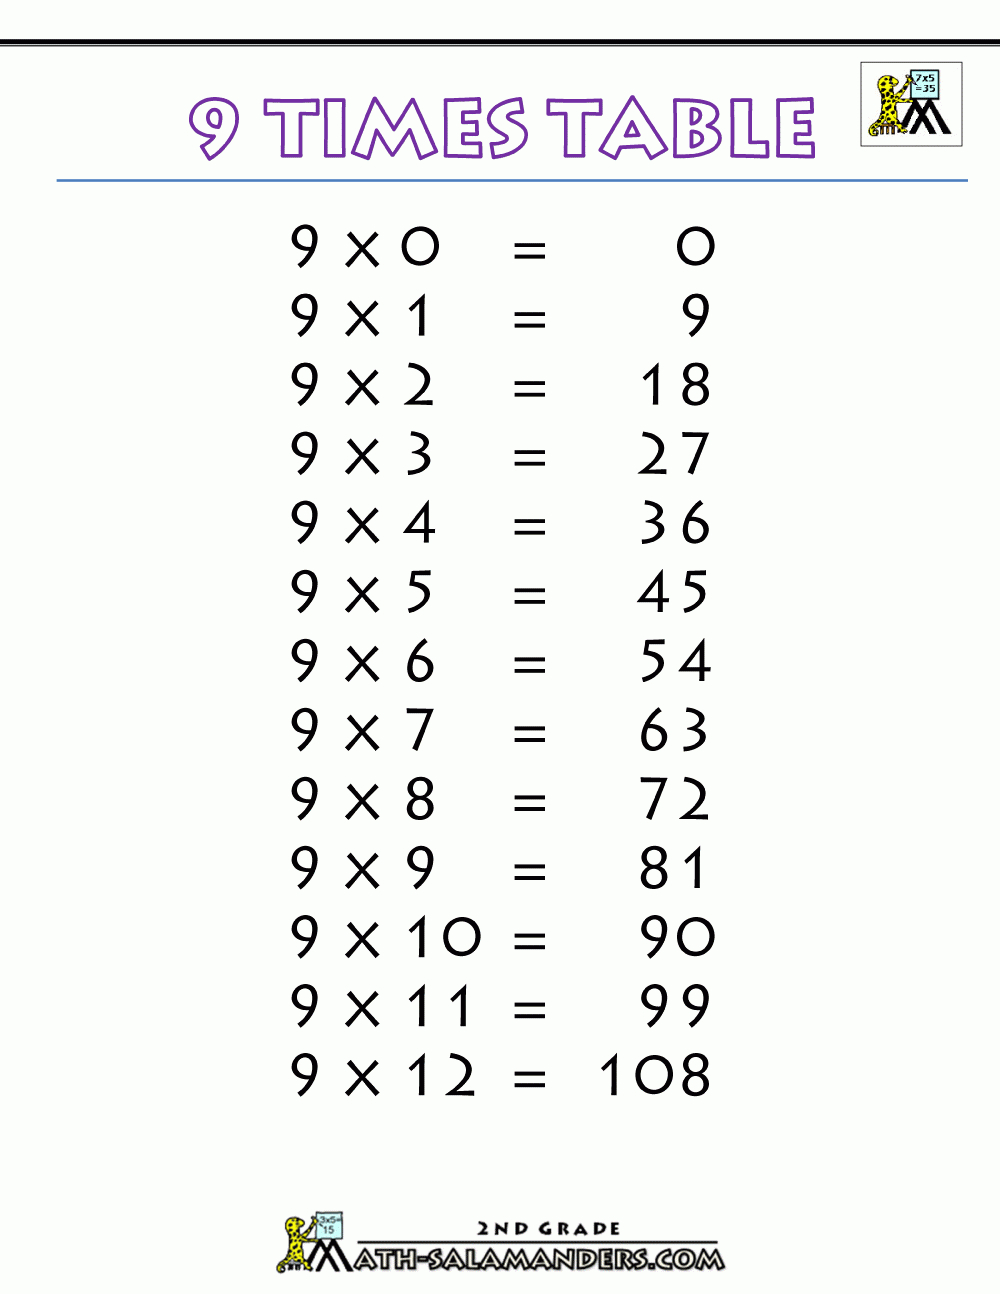 9 Time Tables Worksheet | Printable-Tables-Charts-9-Times inside Printable 9 X 9 Multiplication Table